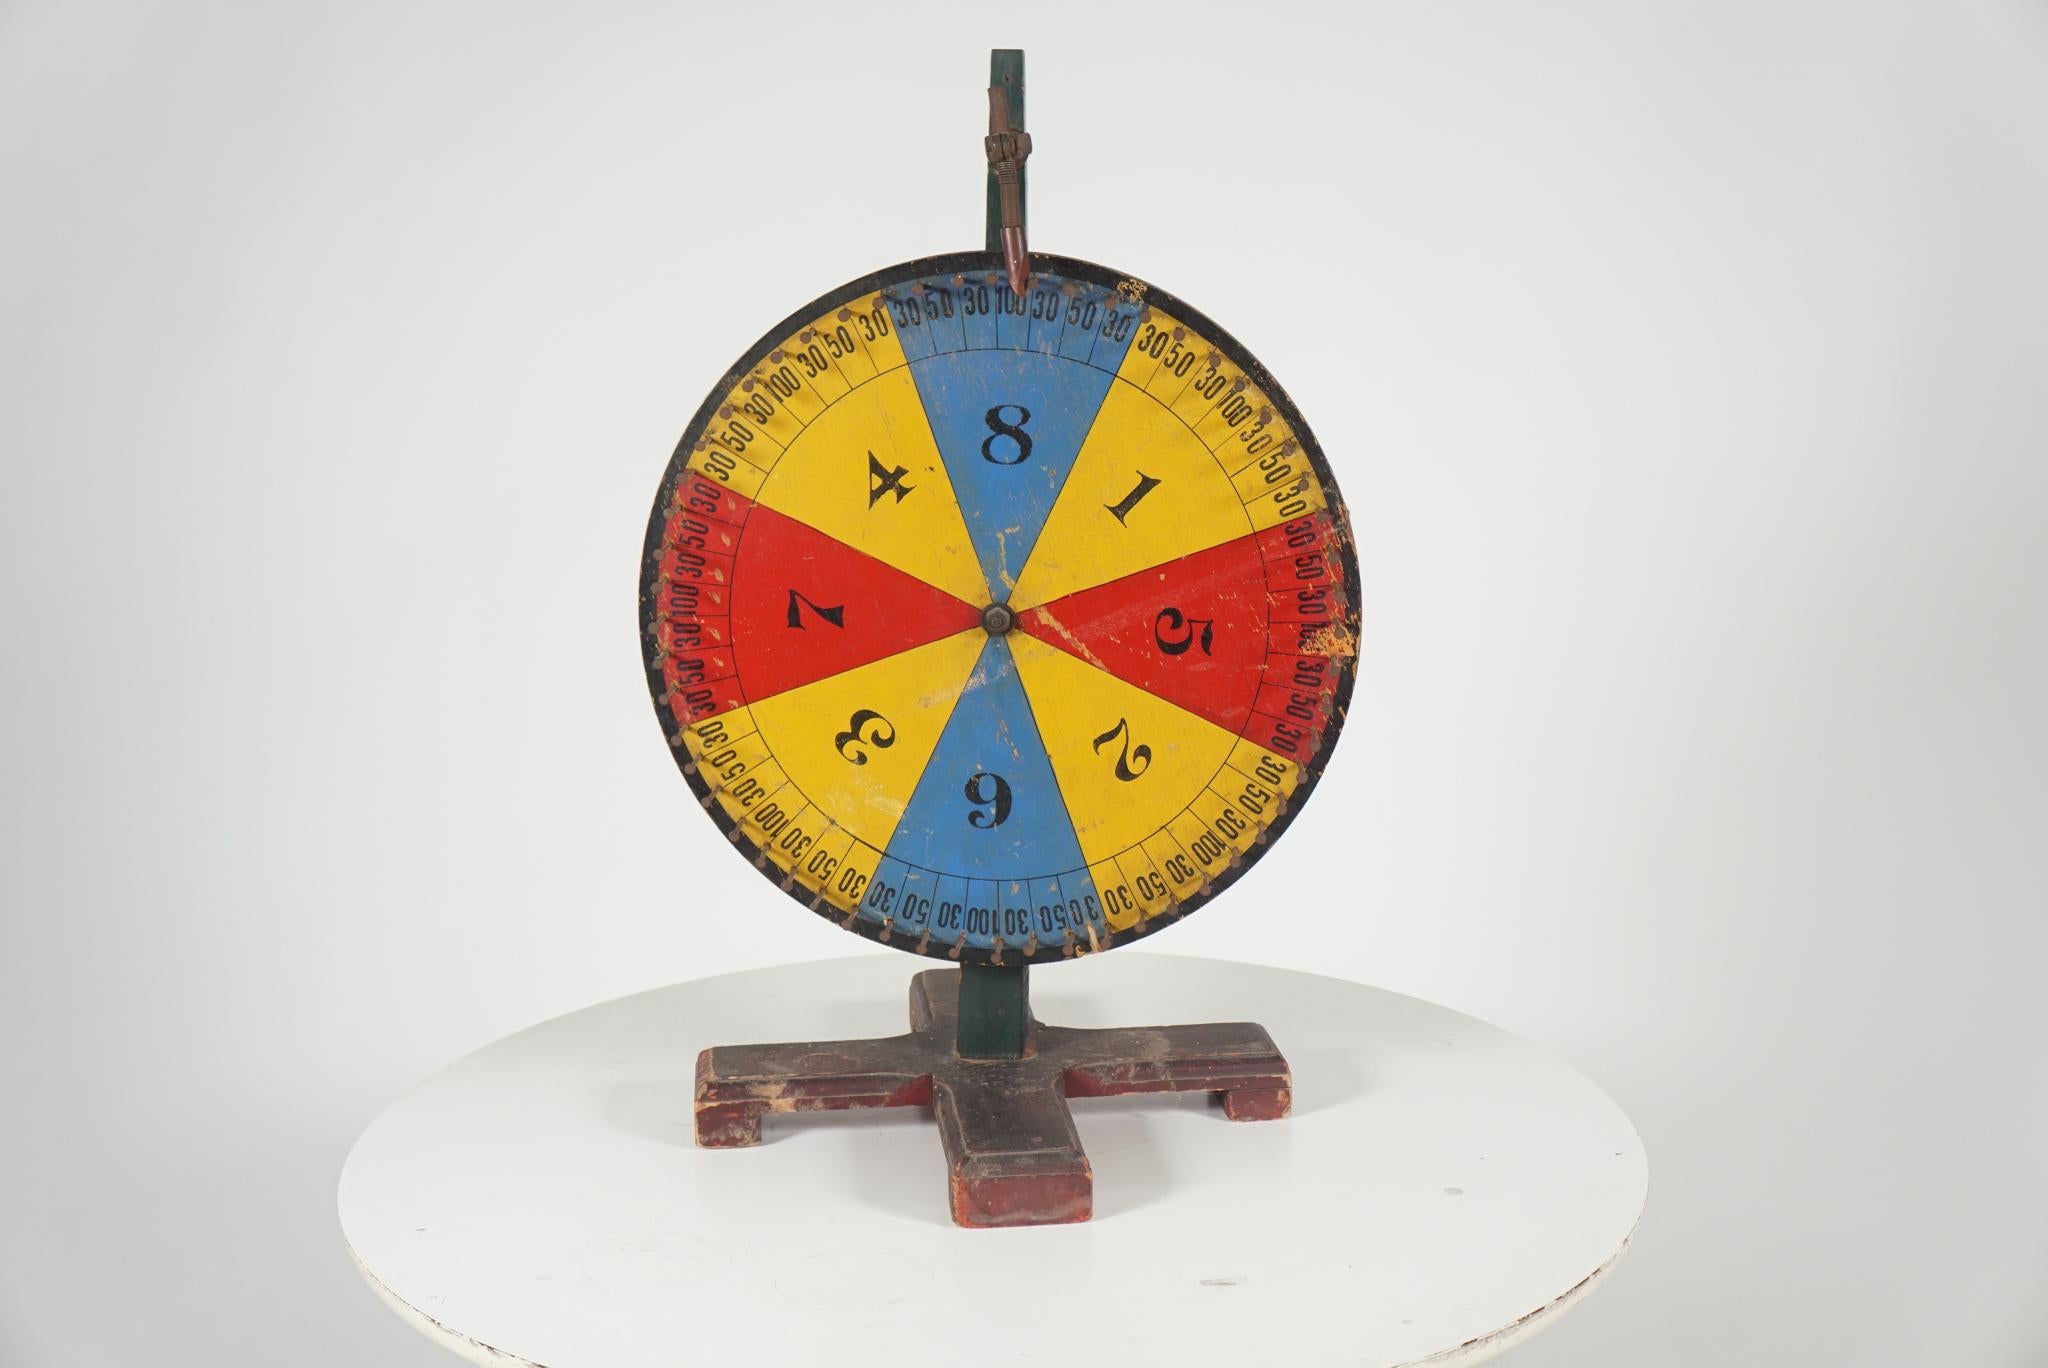 Wheel of chance carnival wheel wonderful primary colors
Diameter of wheel is 16 inches.